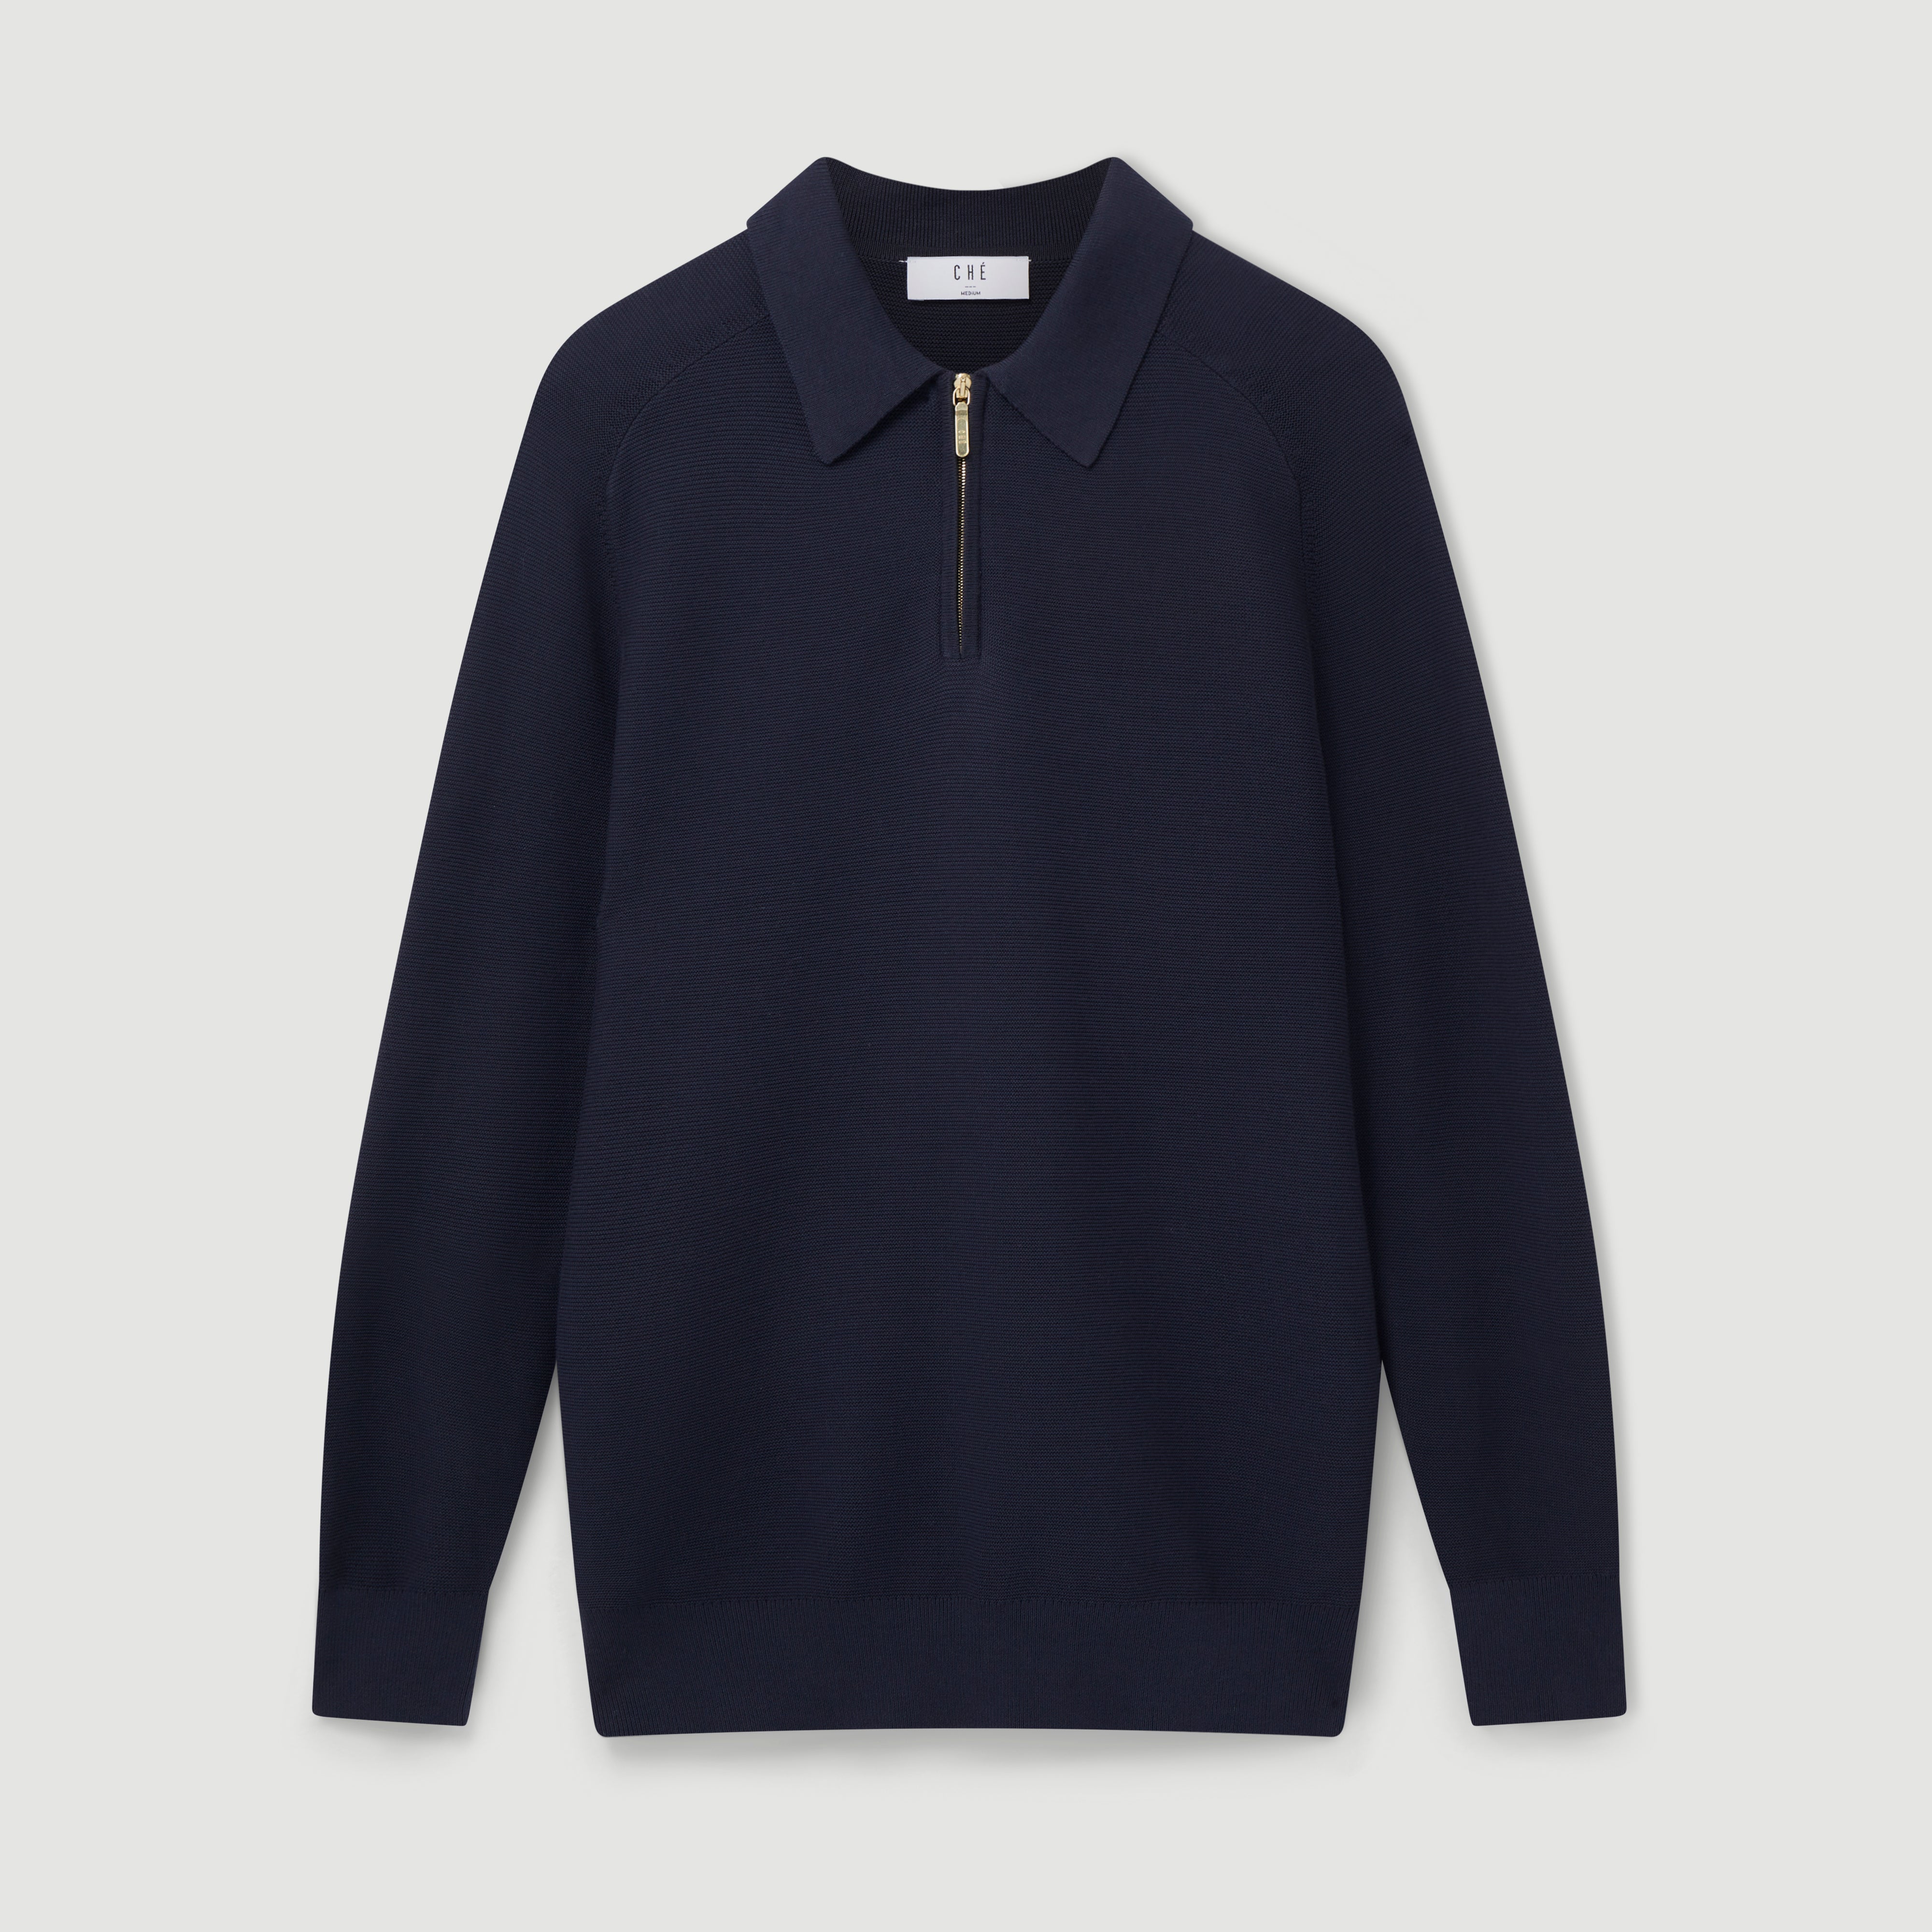 CHÉ | Harlow Navy Long Sleeve Polo Shirt | Timeless 50s-Inspired Smart ...